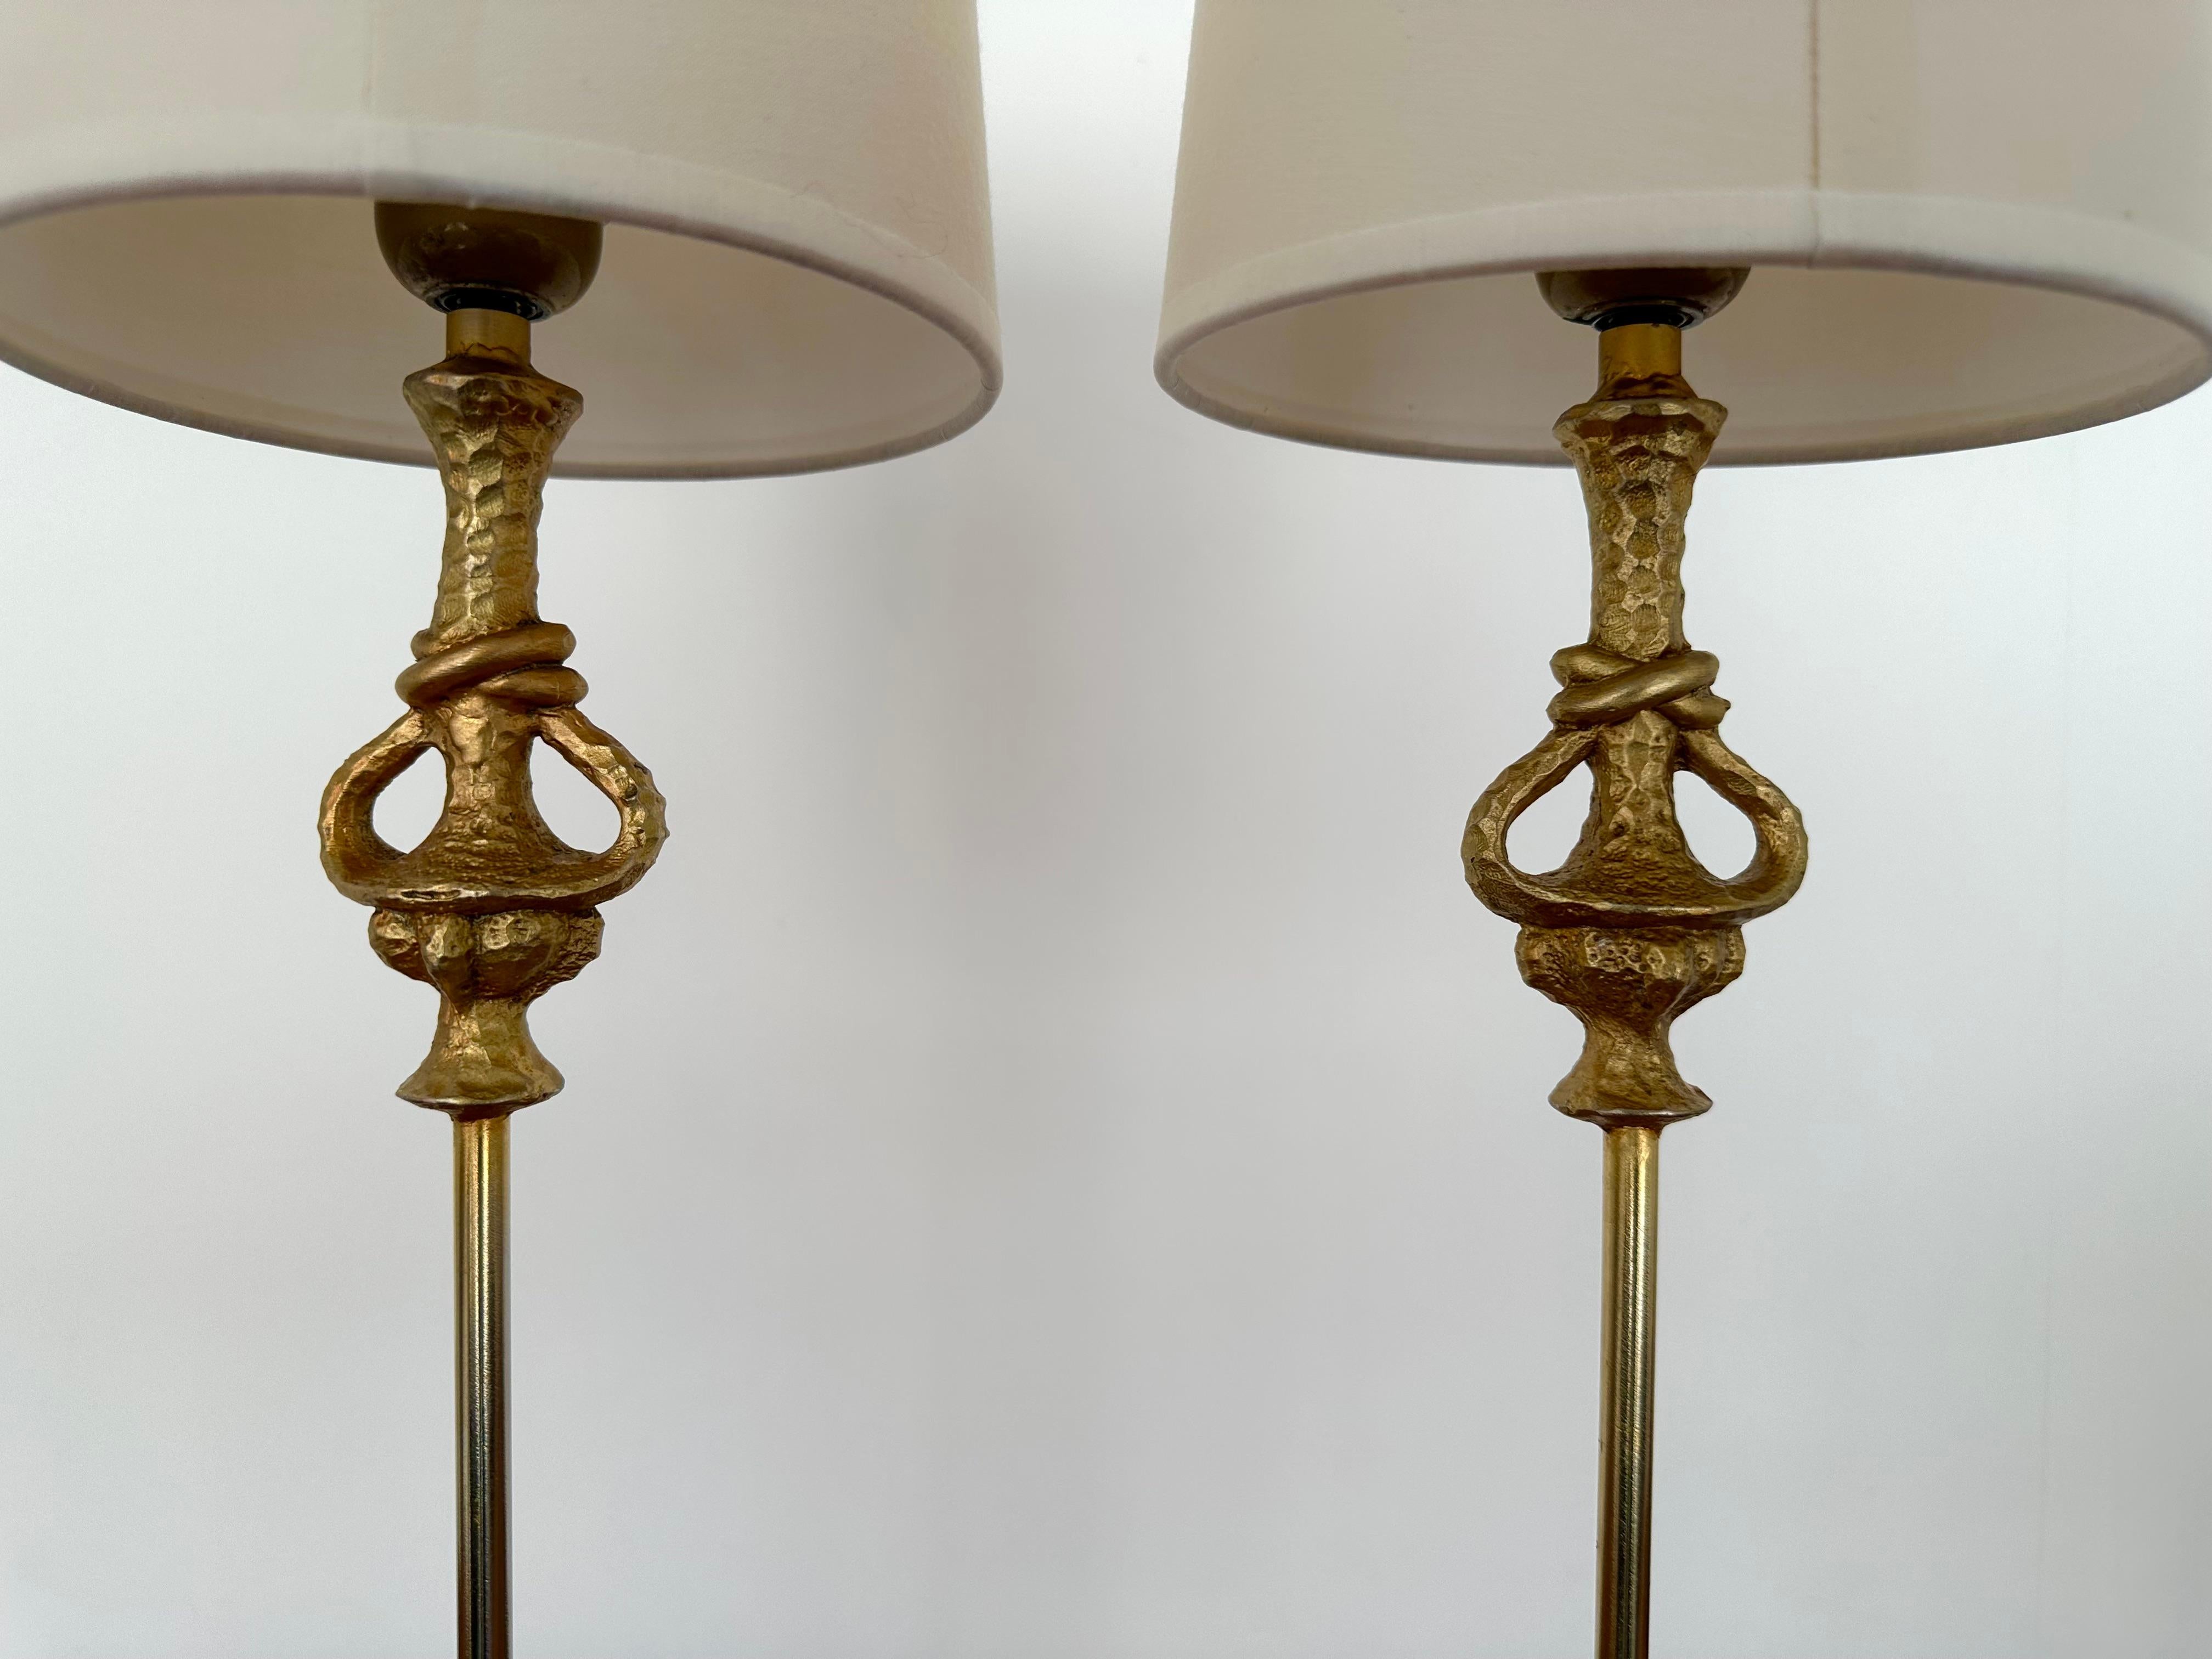 Brutalist Pair of Lamps by Nicola Dewael for Fondica, France, 1990s For Sale